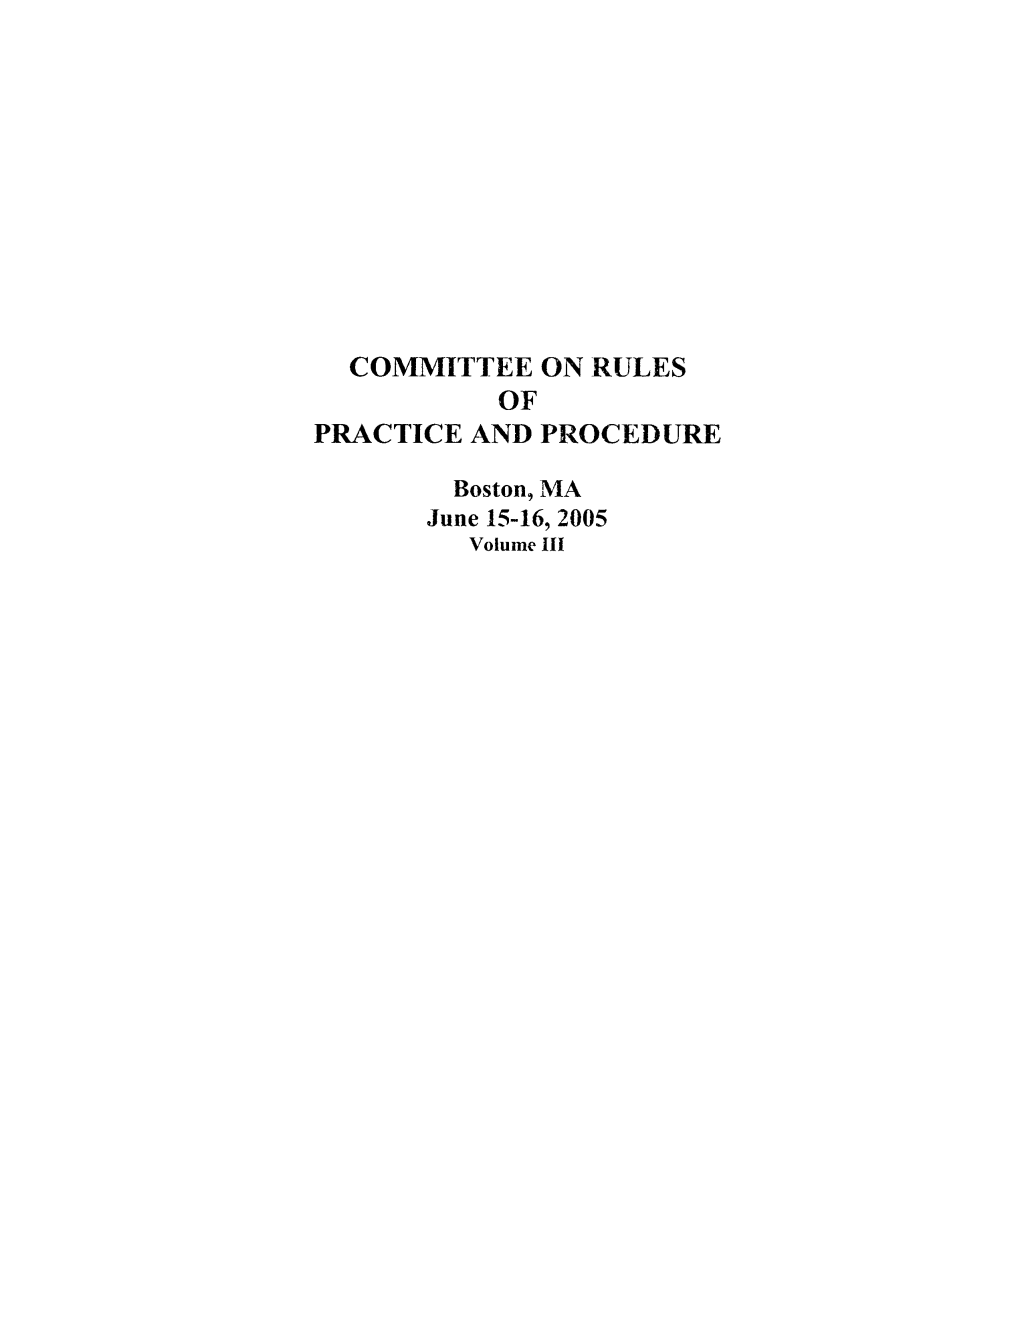 Committee on Rules of Practice and Procedure